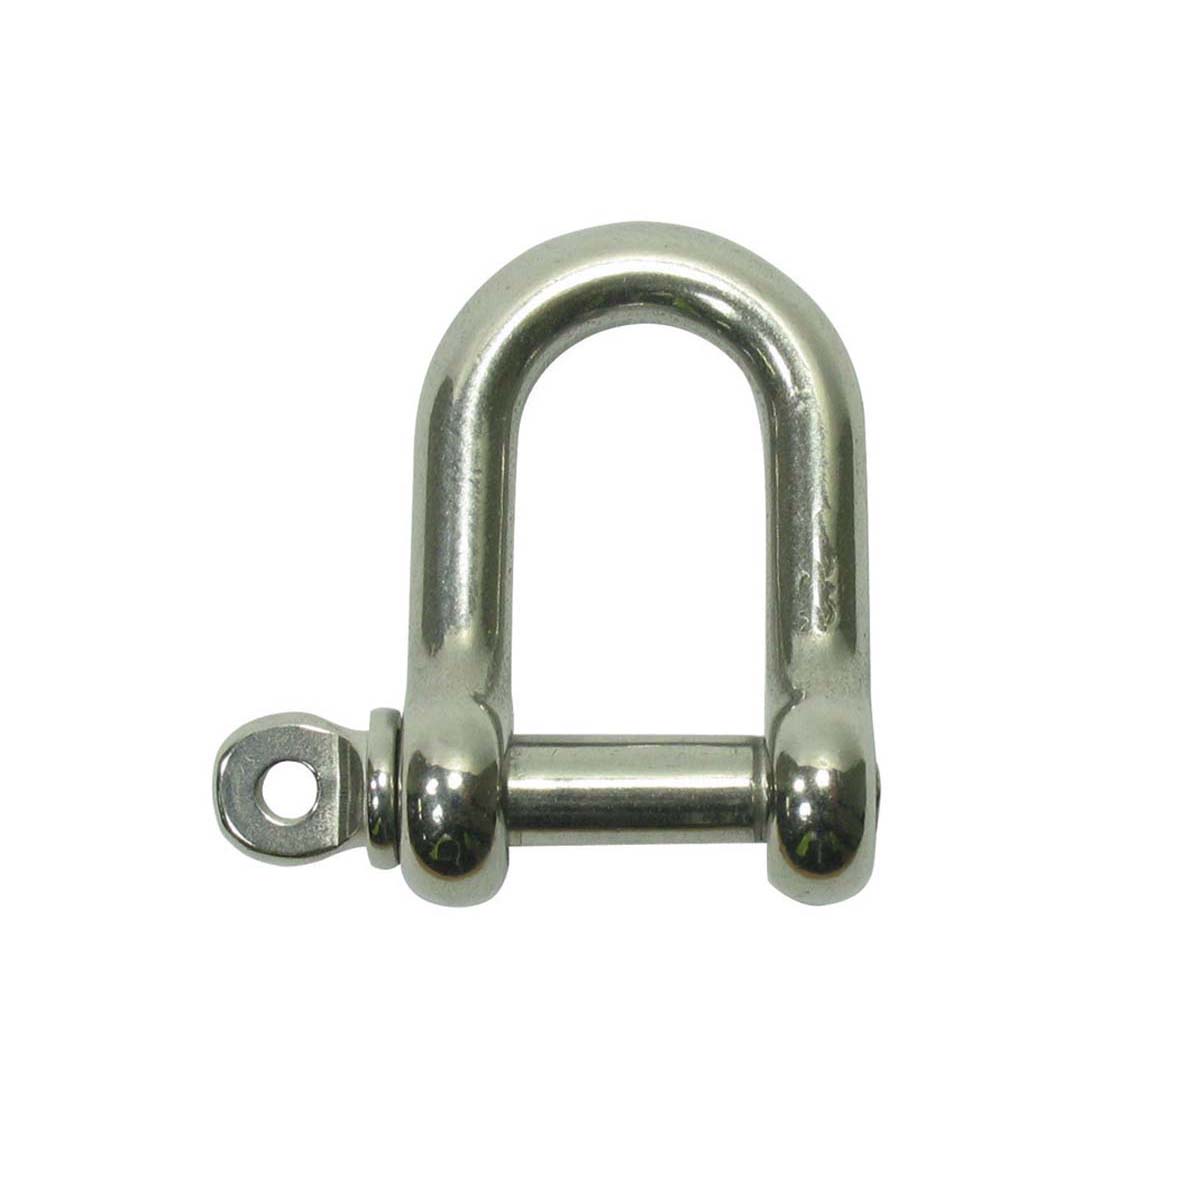 Blueline Stainless Steel D Shackle 5mm